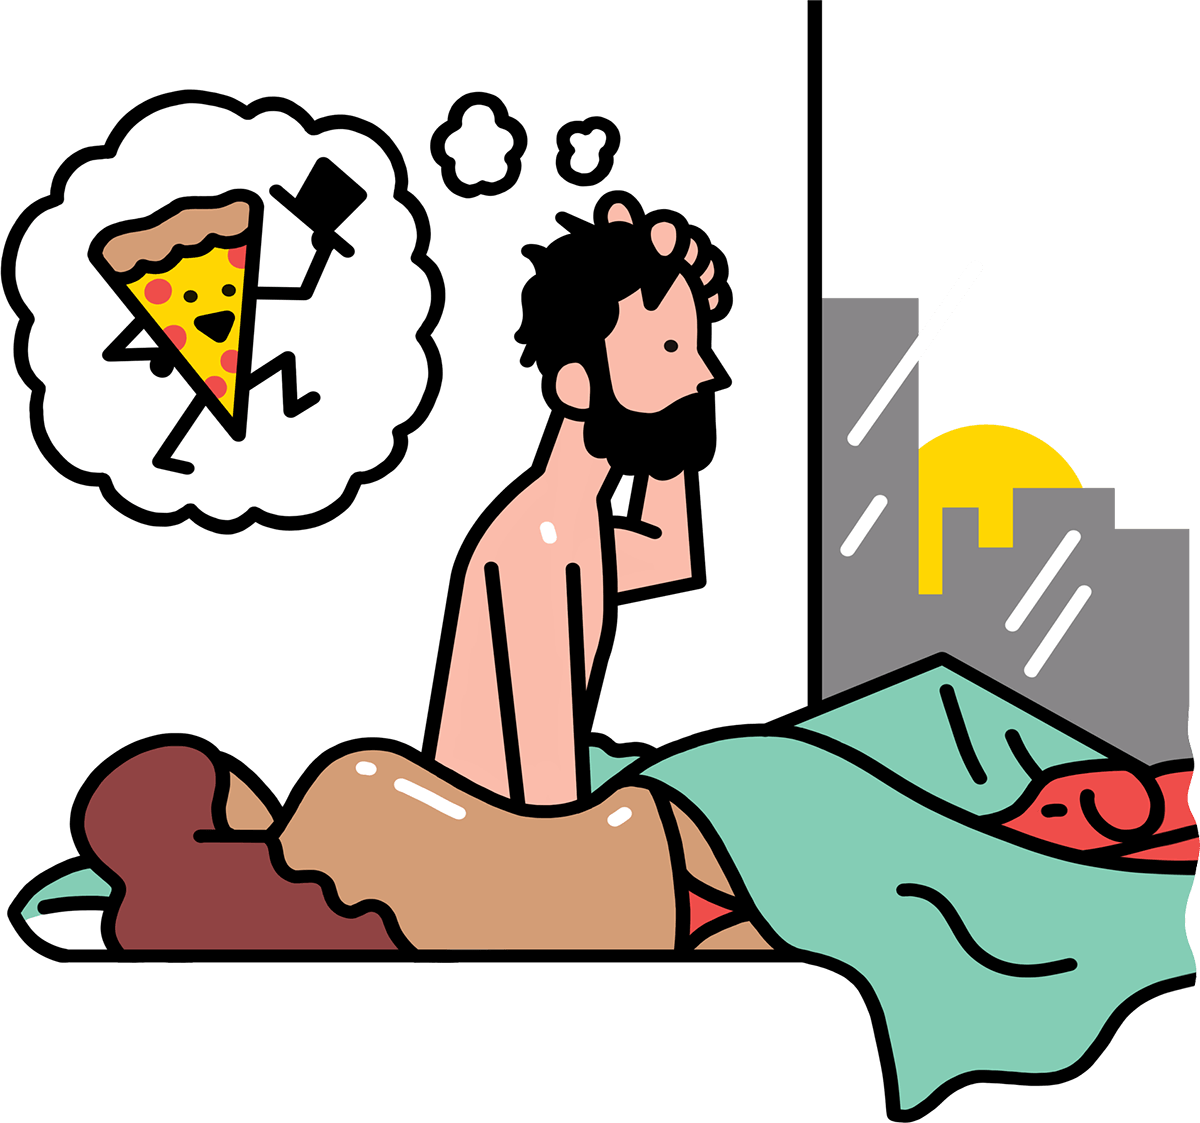 couple waking in the morning dreaming of pizza